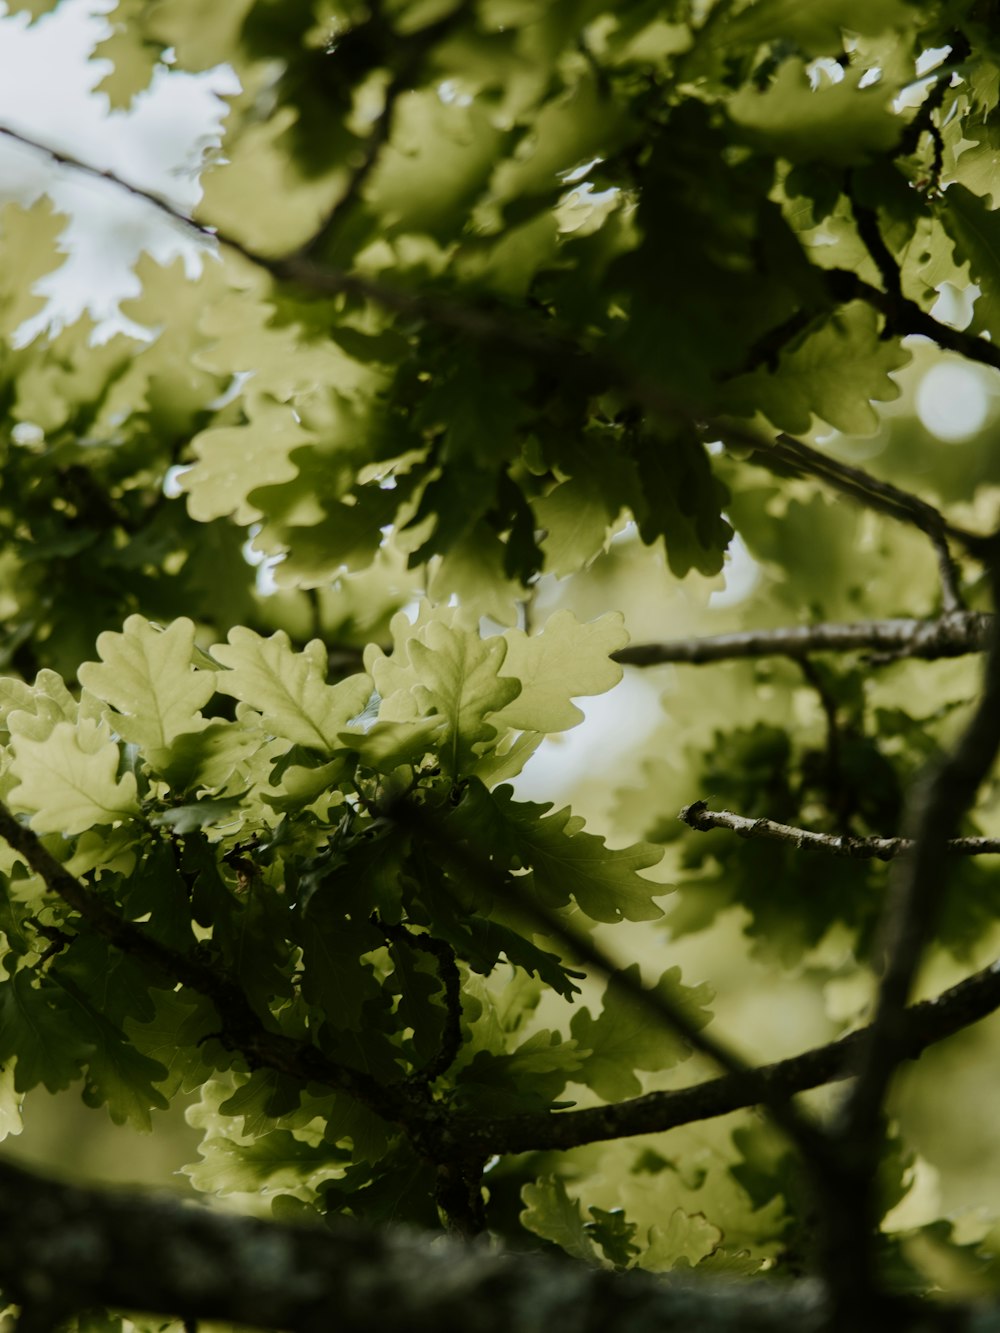 green leafed trees in close-up photo